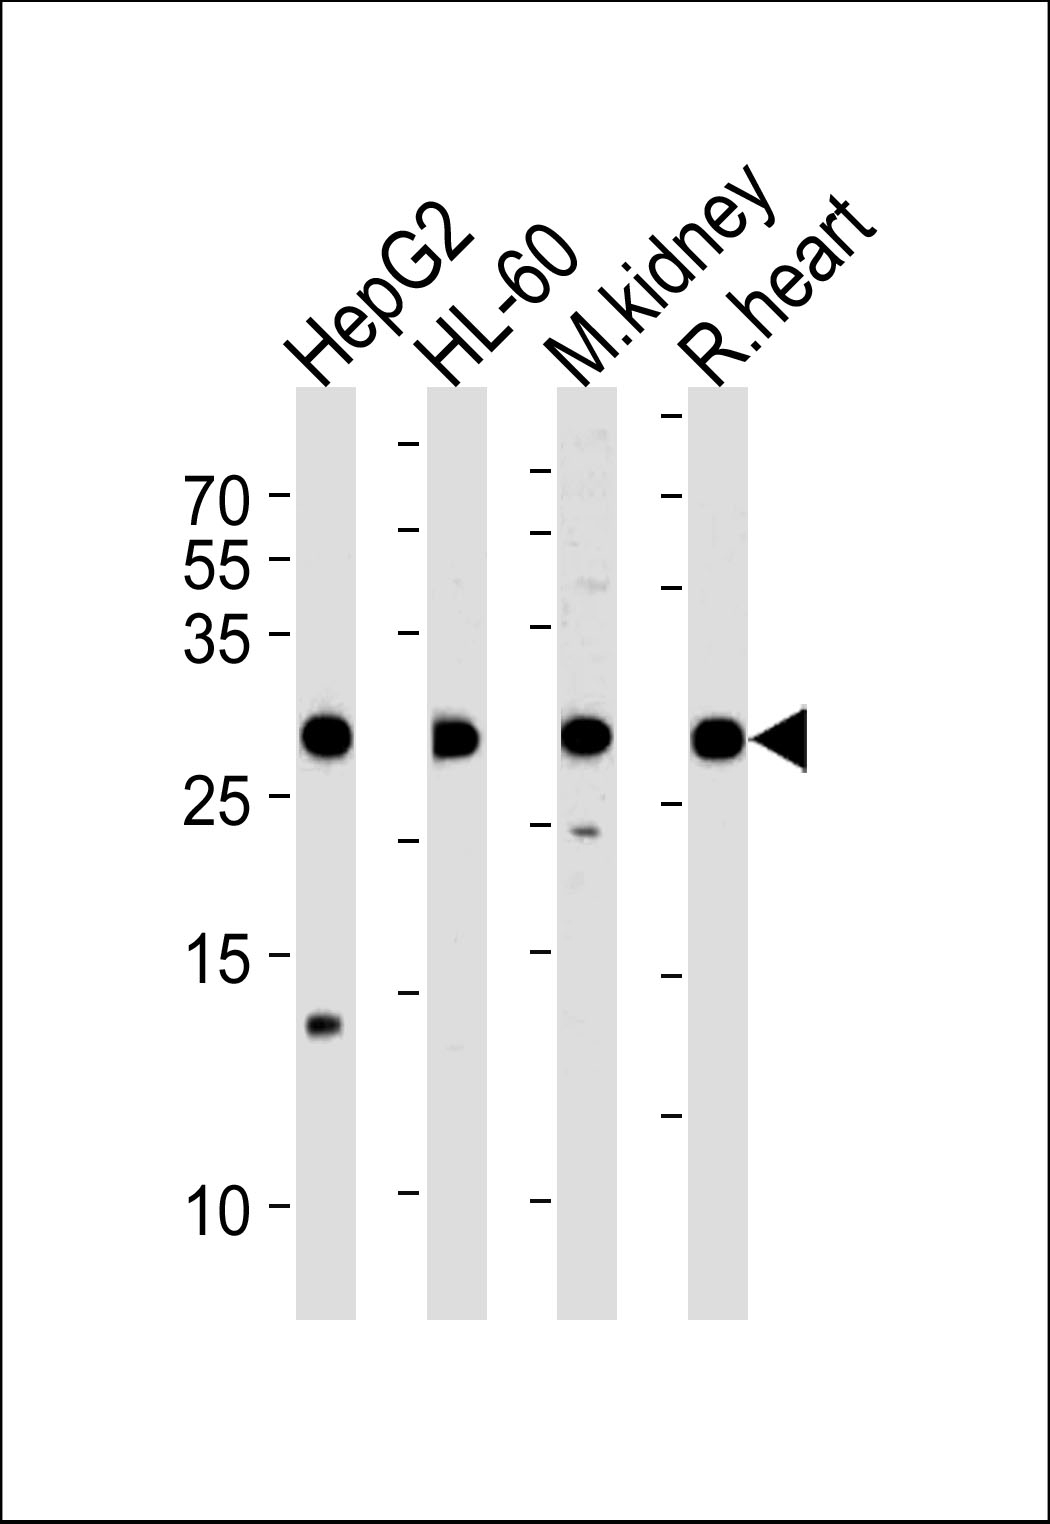 ATP5F1 Antibody (Center) (Cat. #AP20527c) western blot analysis in HepG2,HL-60 cell line,mouse kidney and rat heart tissue lysates (35ug/lane).This demonstrates the ATP5F1 antibody detected the ATP5F1 protein (arrow).